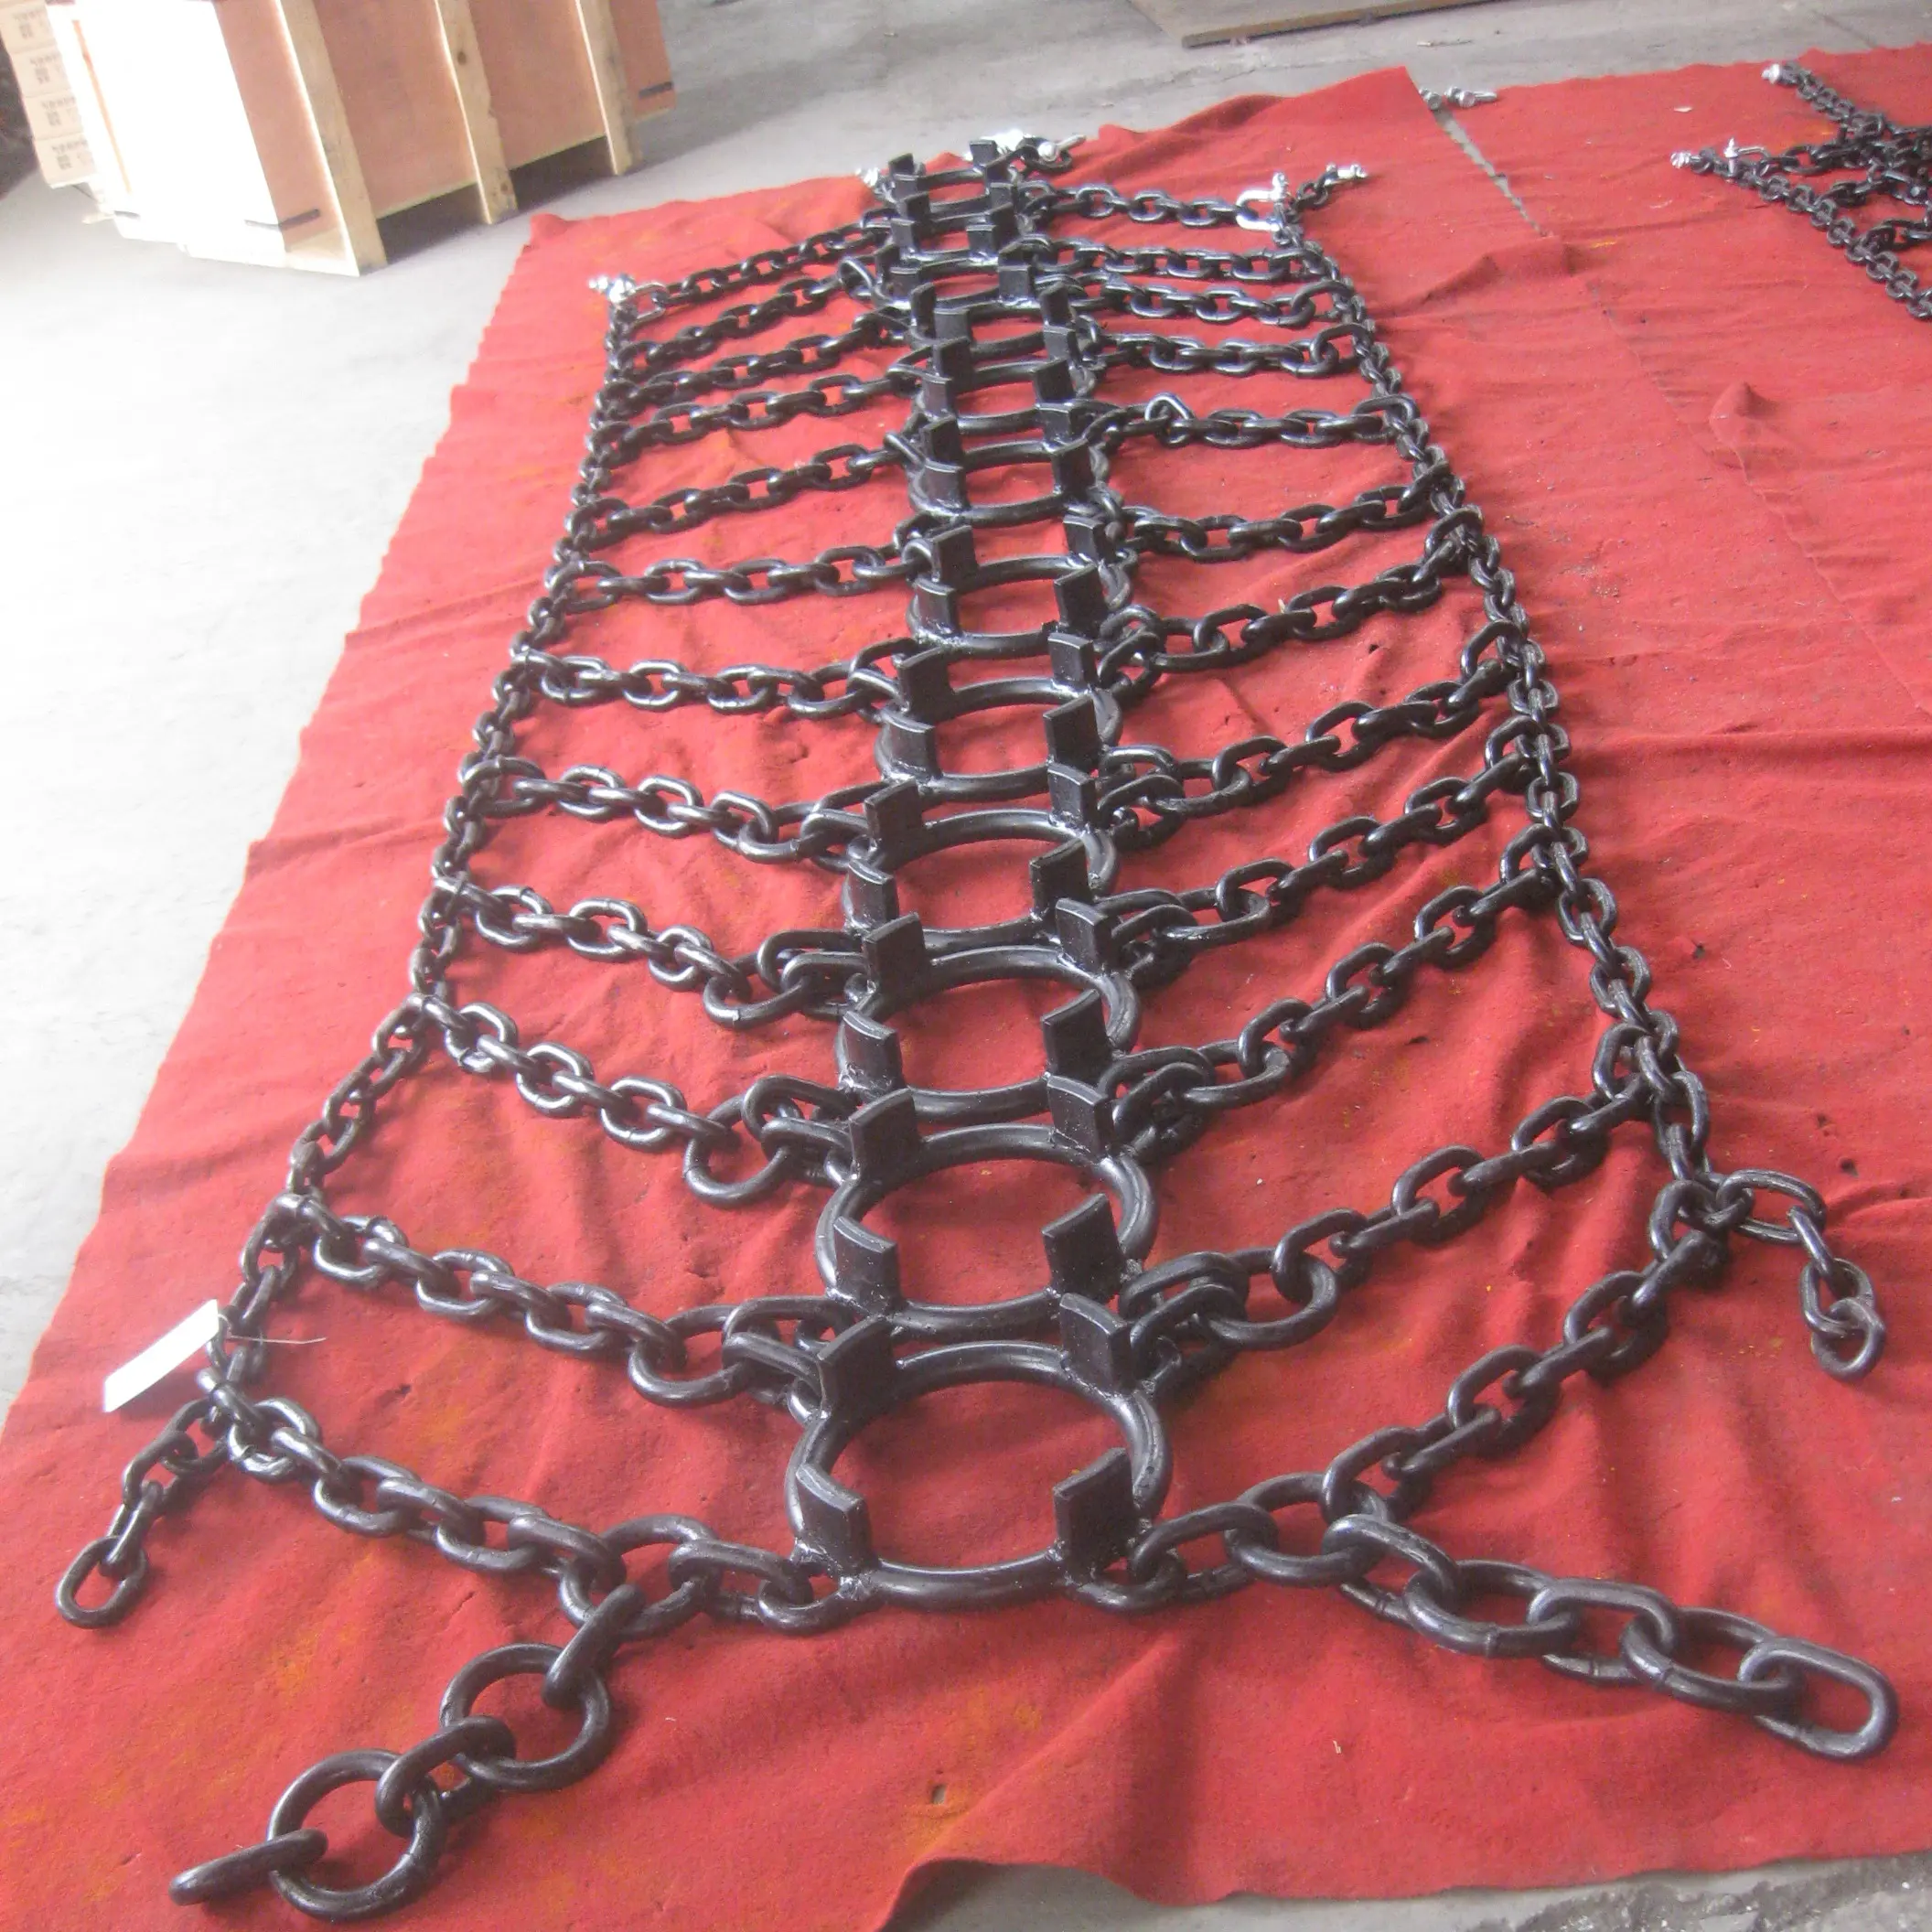 Fixed ring skidder chains